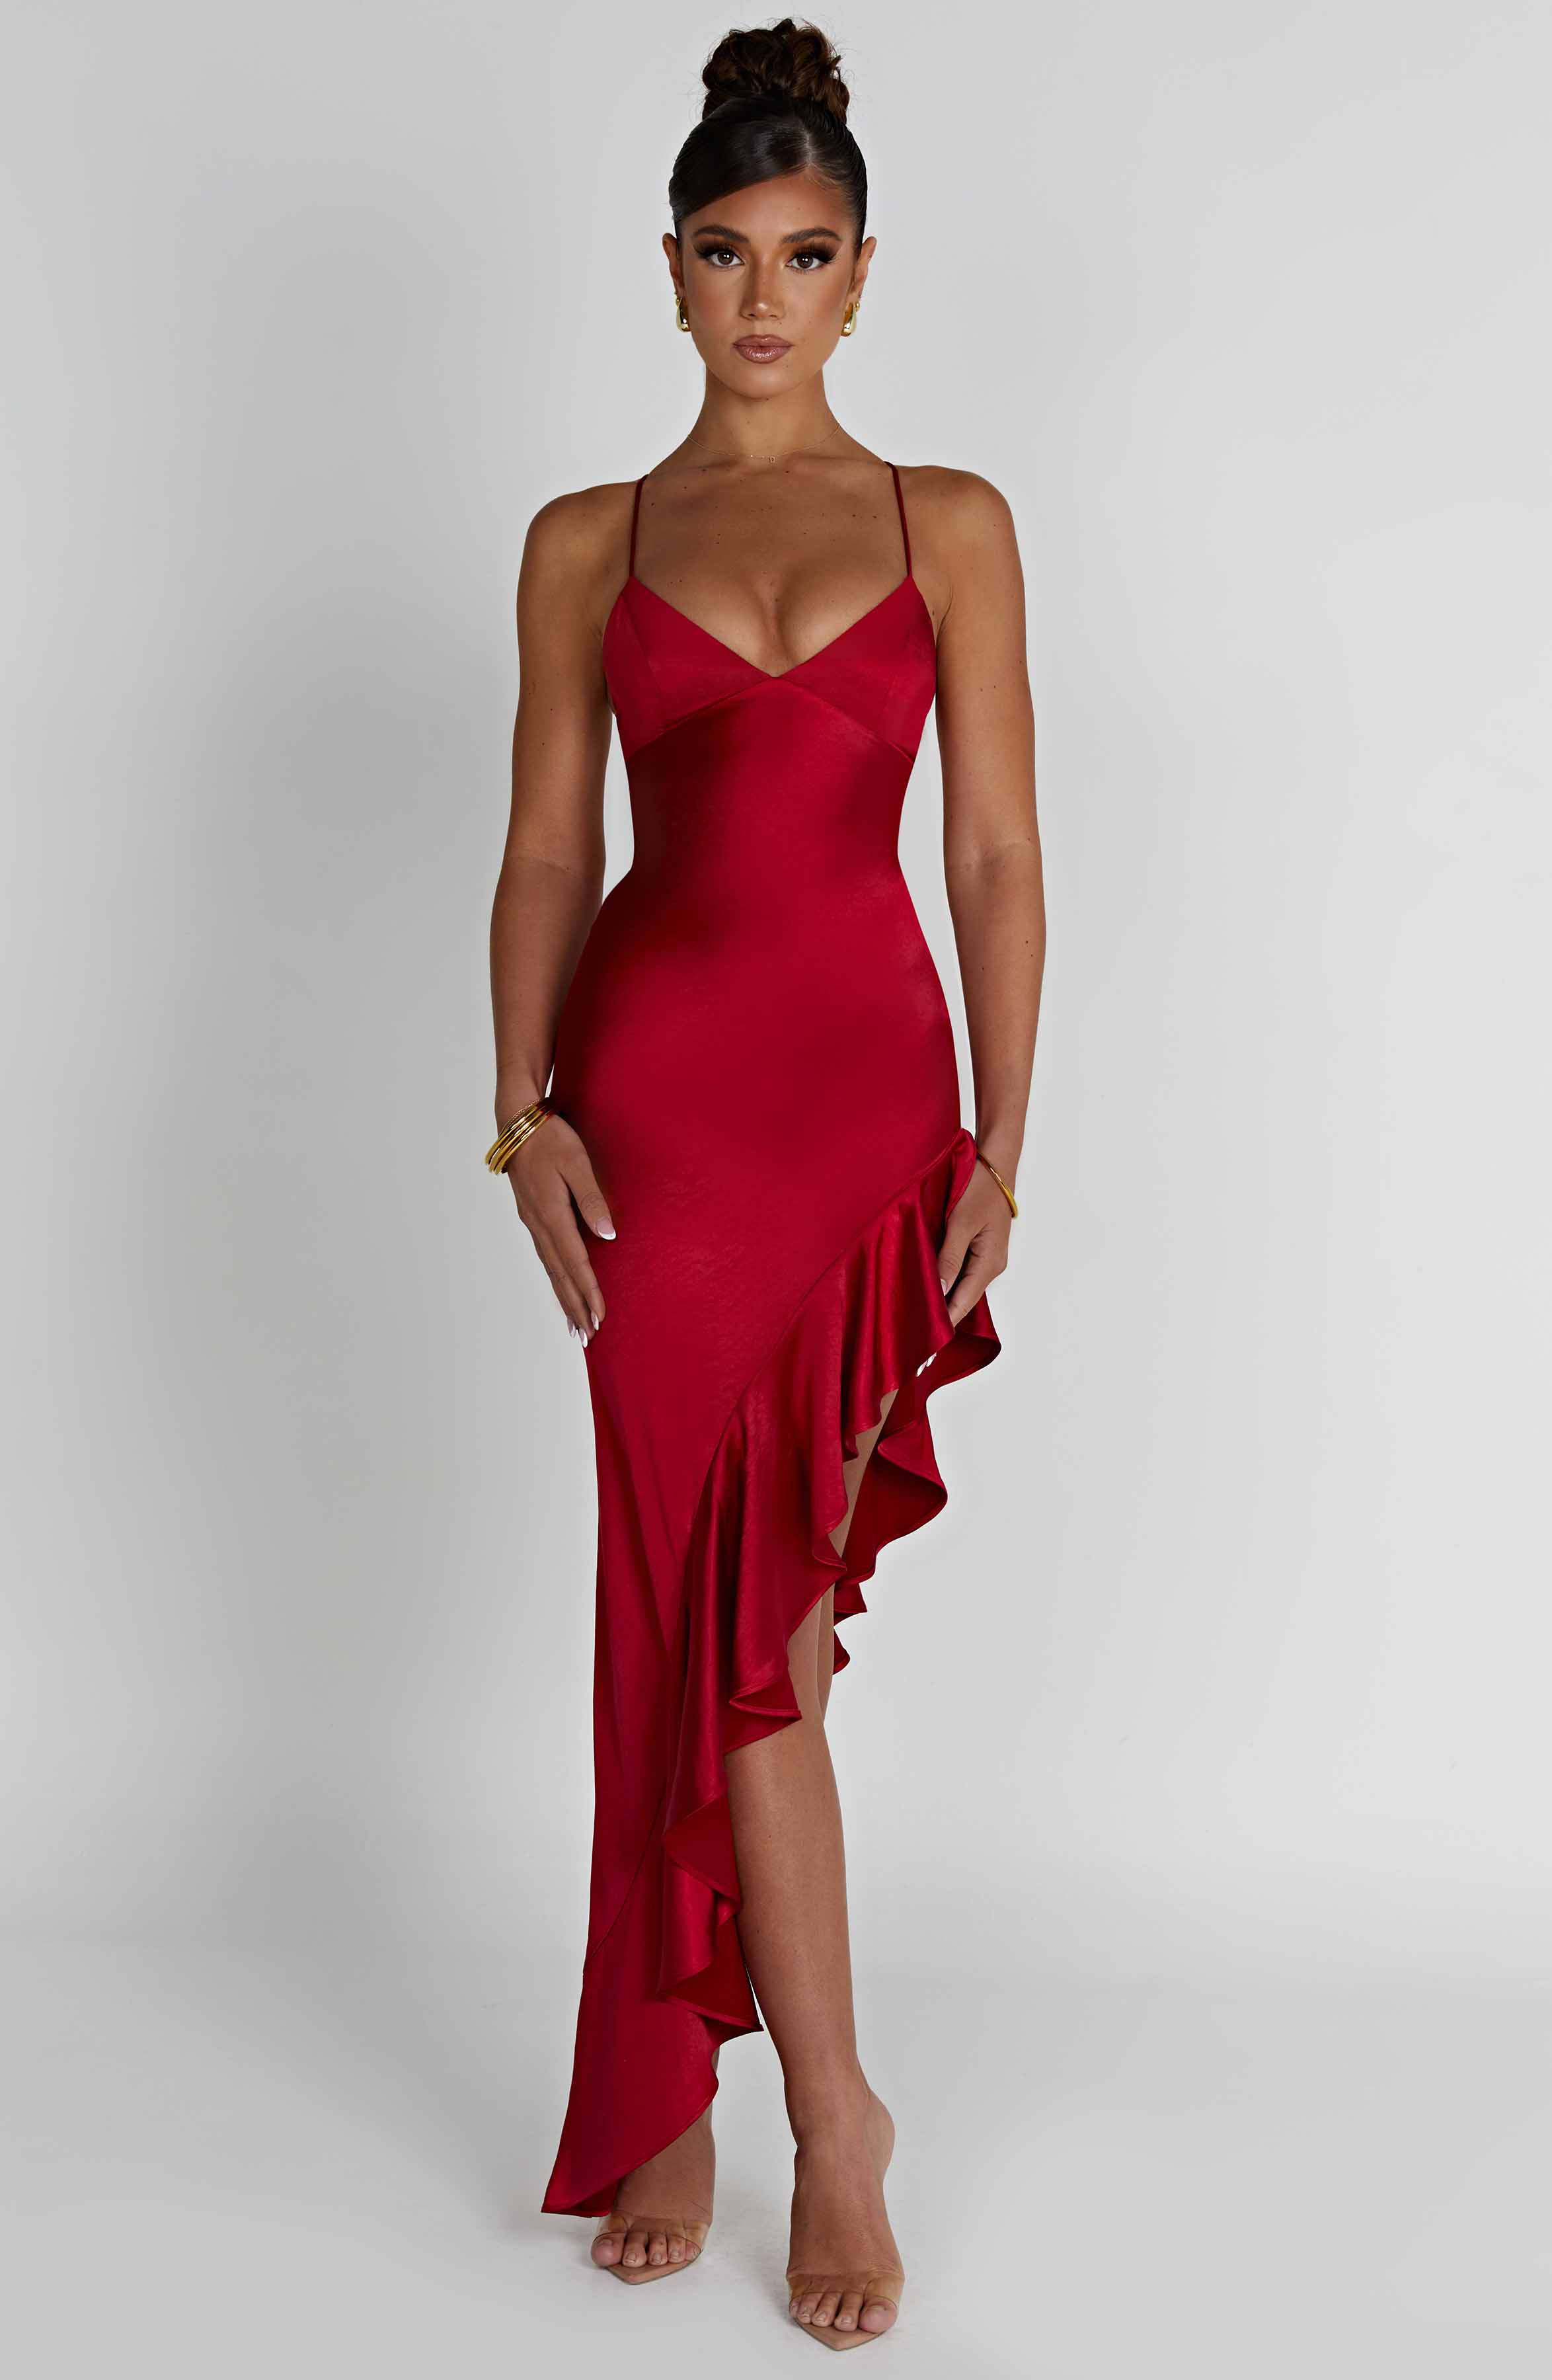 Shop Formal Dress - Flora Midi Dress - Red featured image